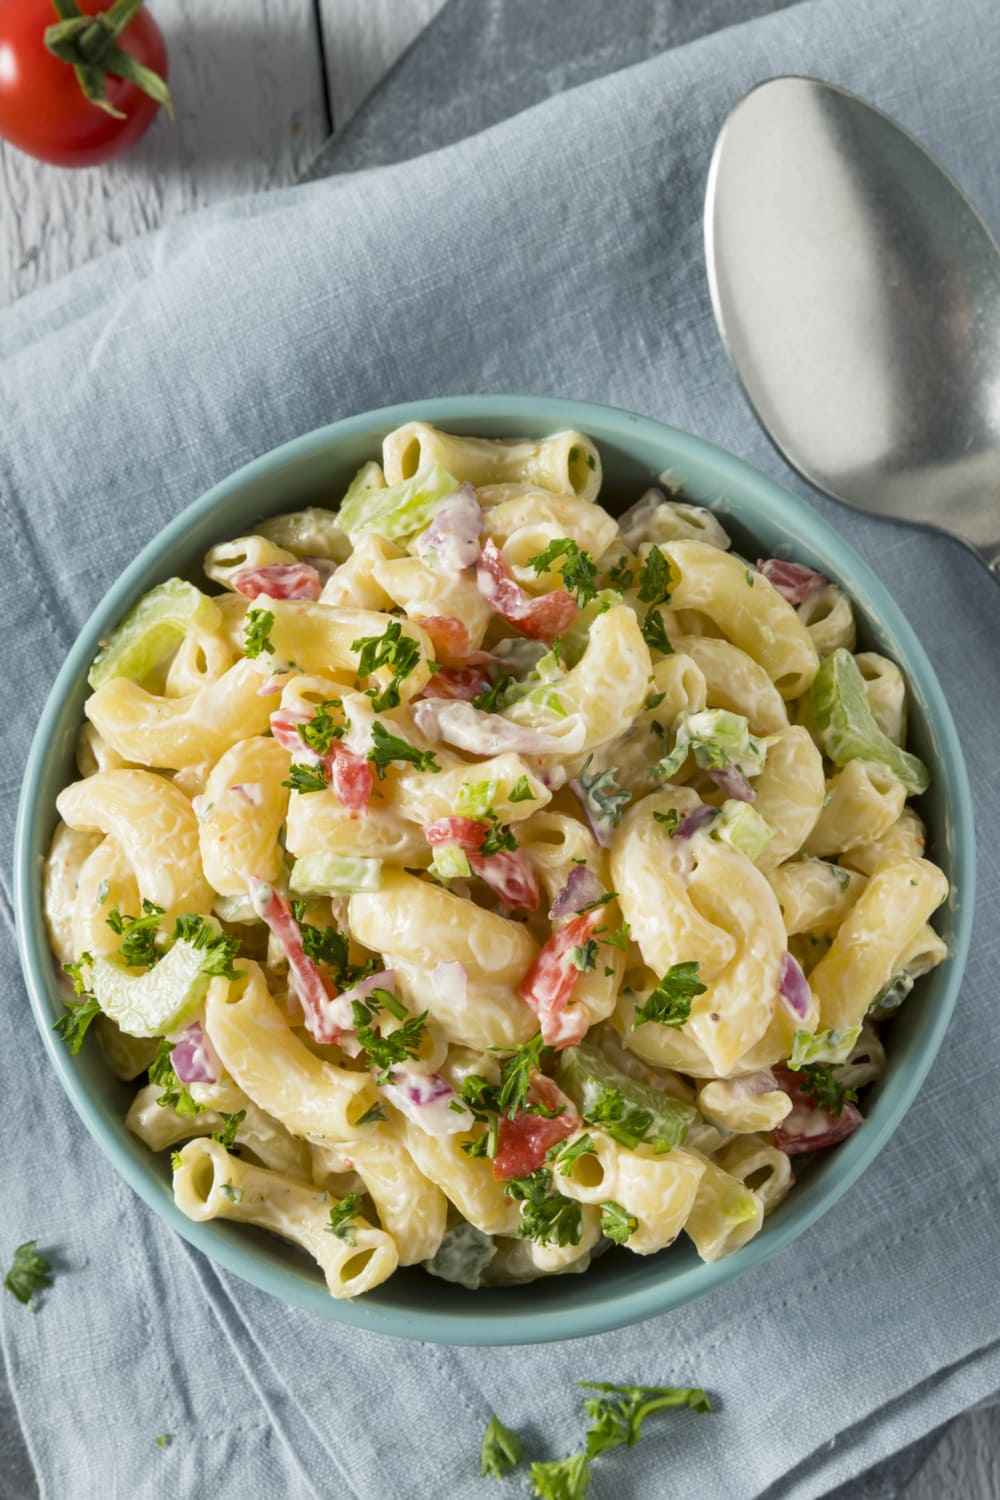 Bowl of elbow pasta with mayonnaise, chopped celery, onions, red and green bell peppers and garnished with parsley